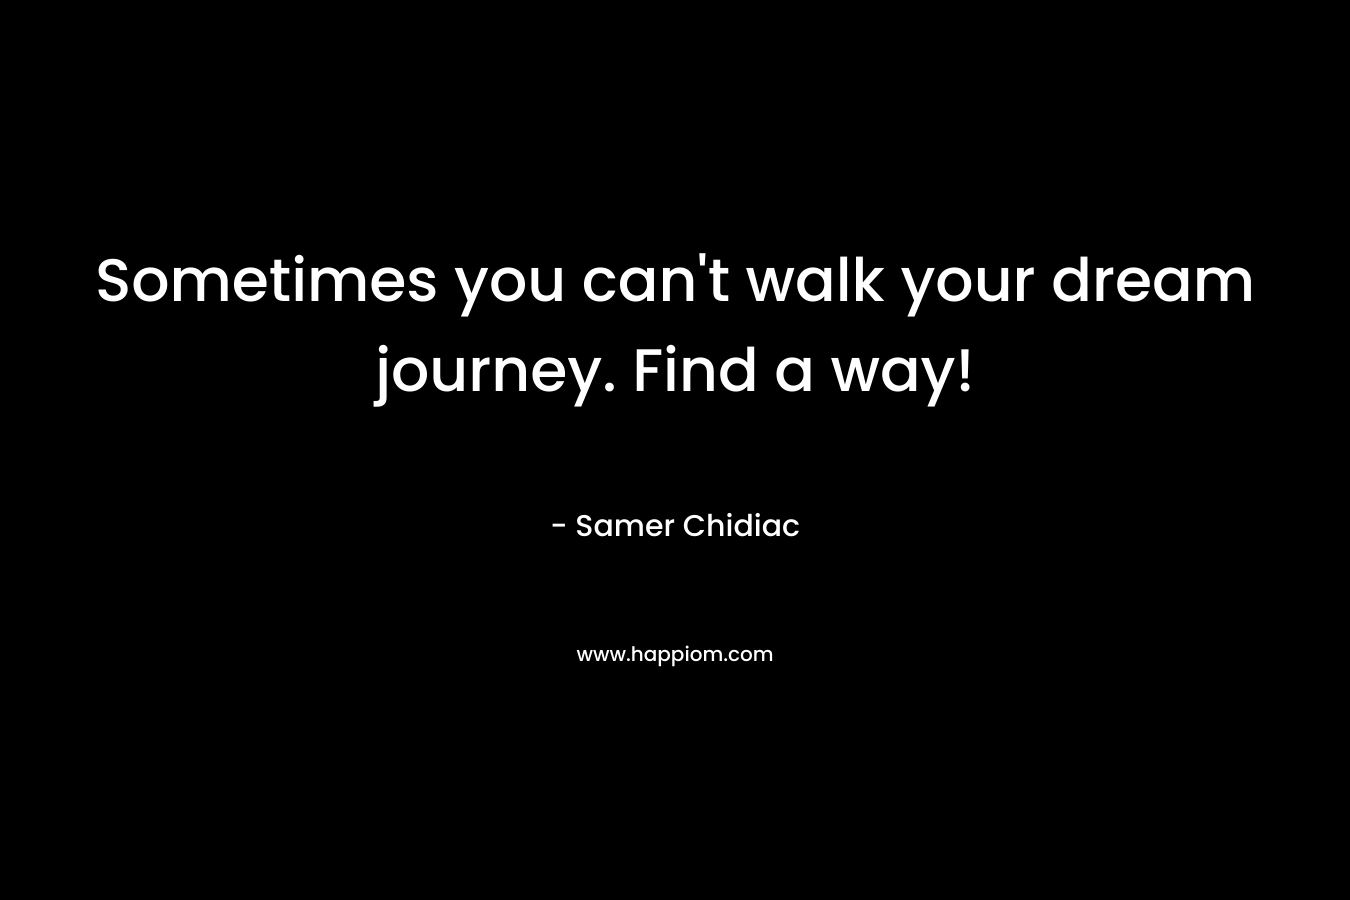 Sometimes you can’t walk your dream journey. Find a way! – Samer Chidiac